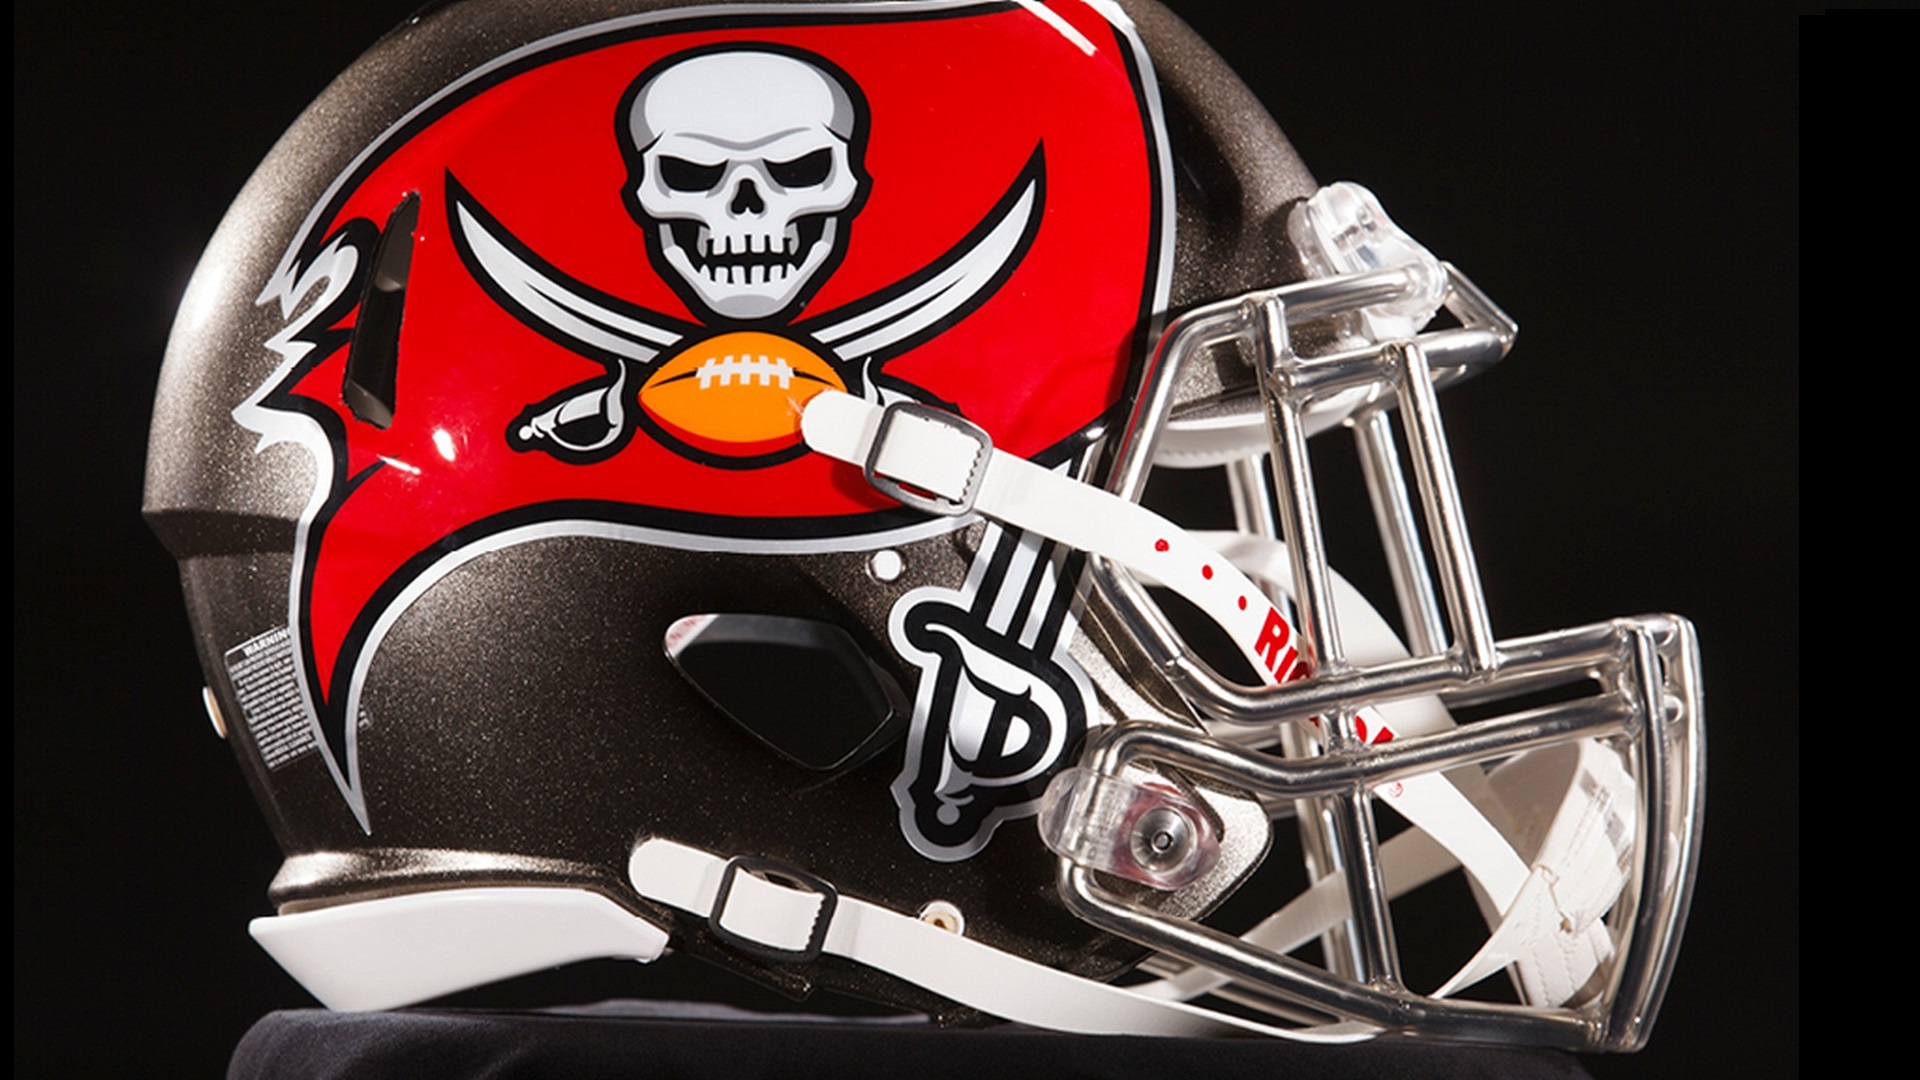 HD Buccaneers Backgrounds With high-resolution 1920X1080 pixel. Download and set as wallpaper for Desktop Computer, Apple iPhone X, XS Max, XR, 8, 7, 6, SE, iPad, Android